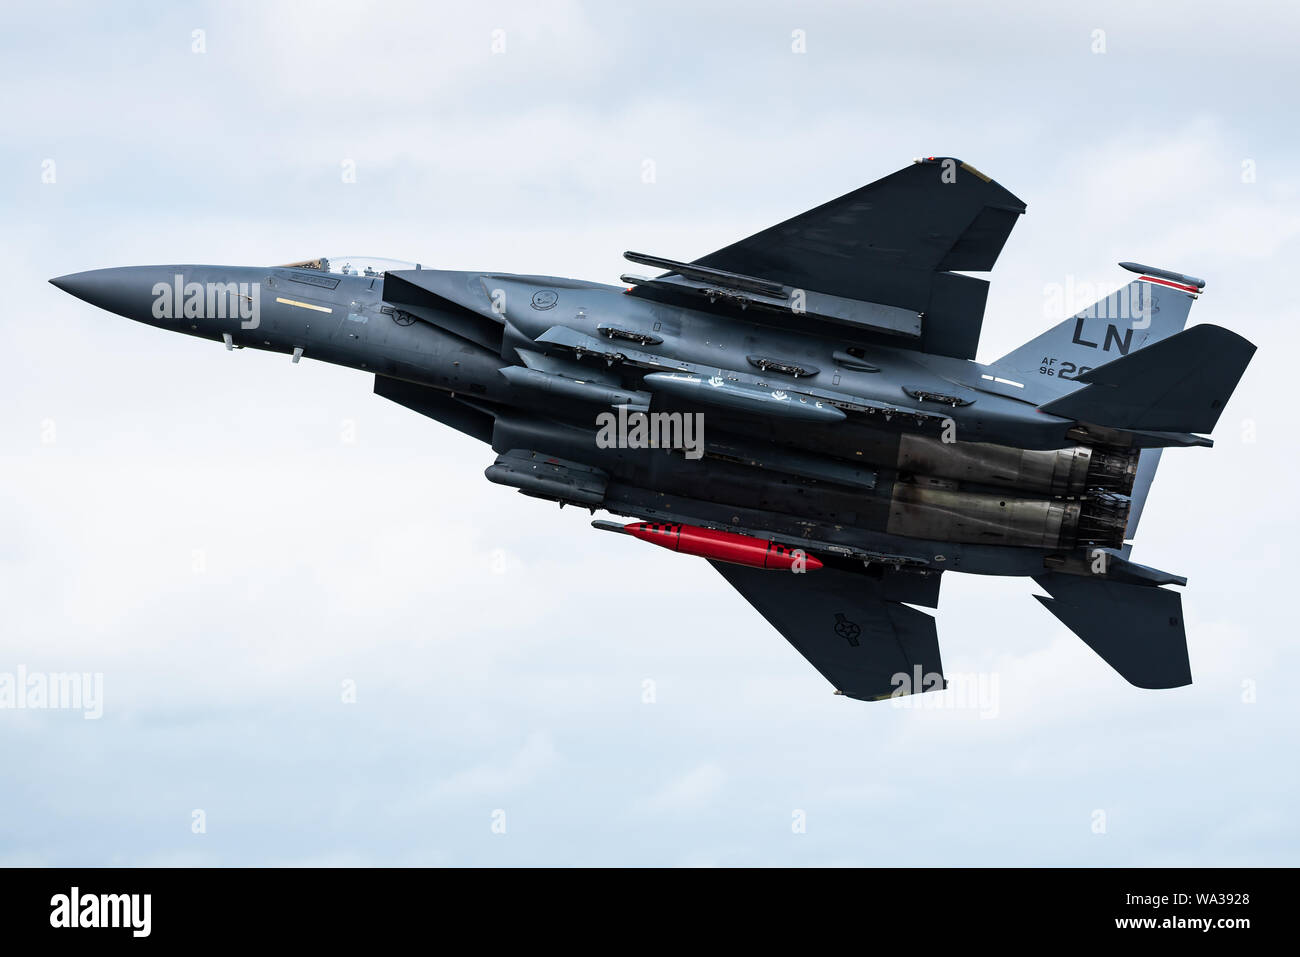 A McDonnell Douglas F-15E Strike Eagle multirole fighter jet from the 48th Fighter Wing of the United States Air Force (USAF). Stock Photo